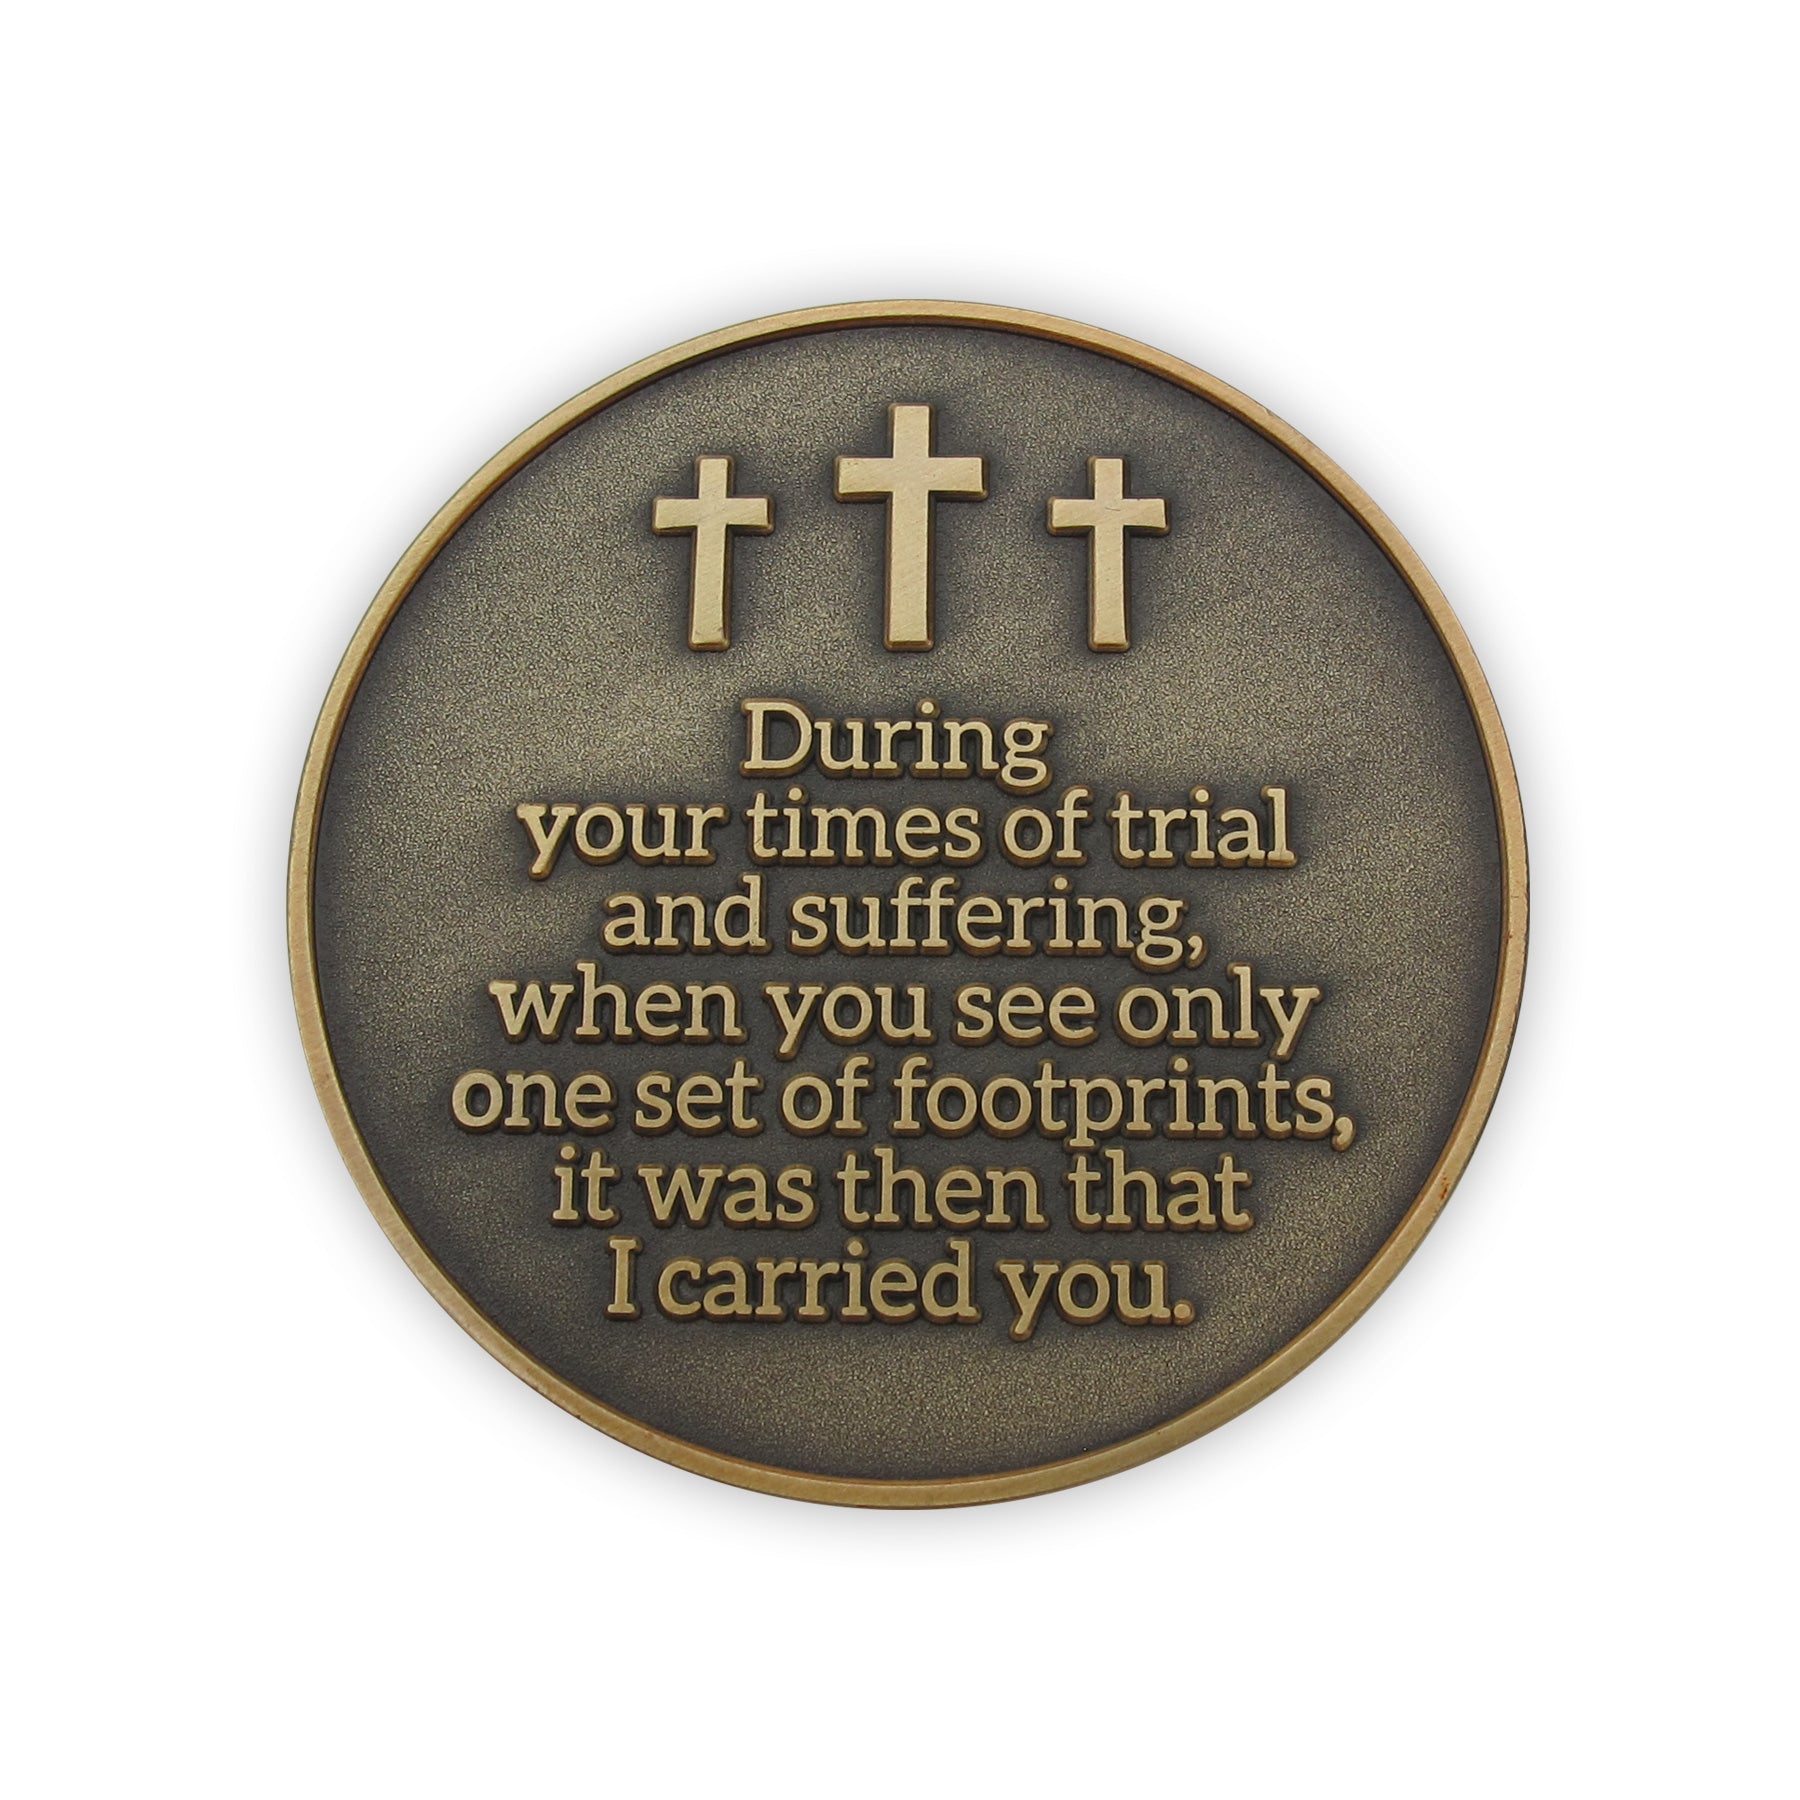 Back: Three crosses with the text "During your times of trial and suffering, when you see only one set of footprints, it was then that I carried you."